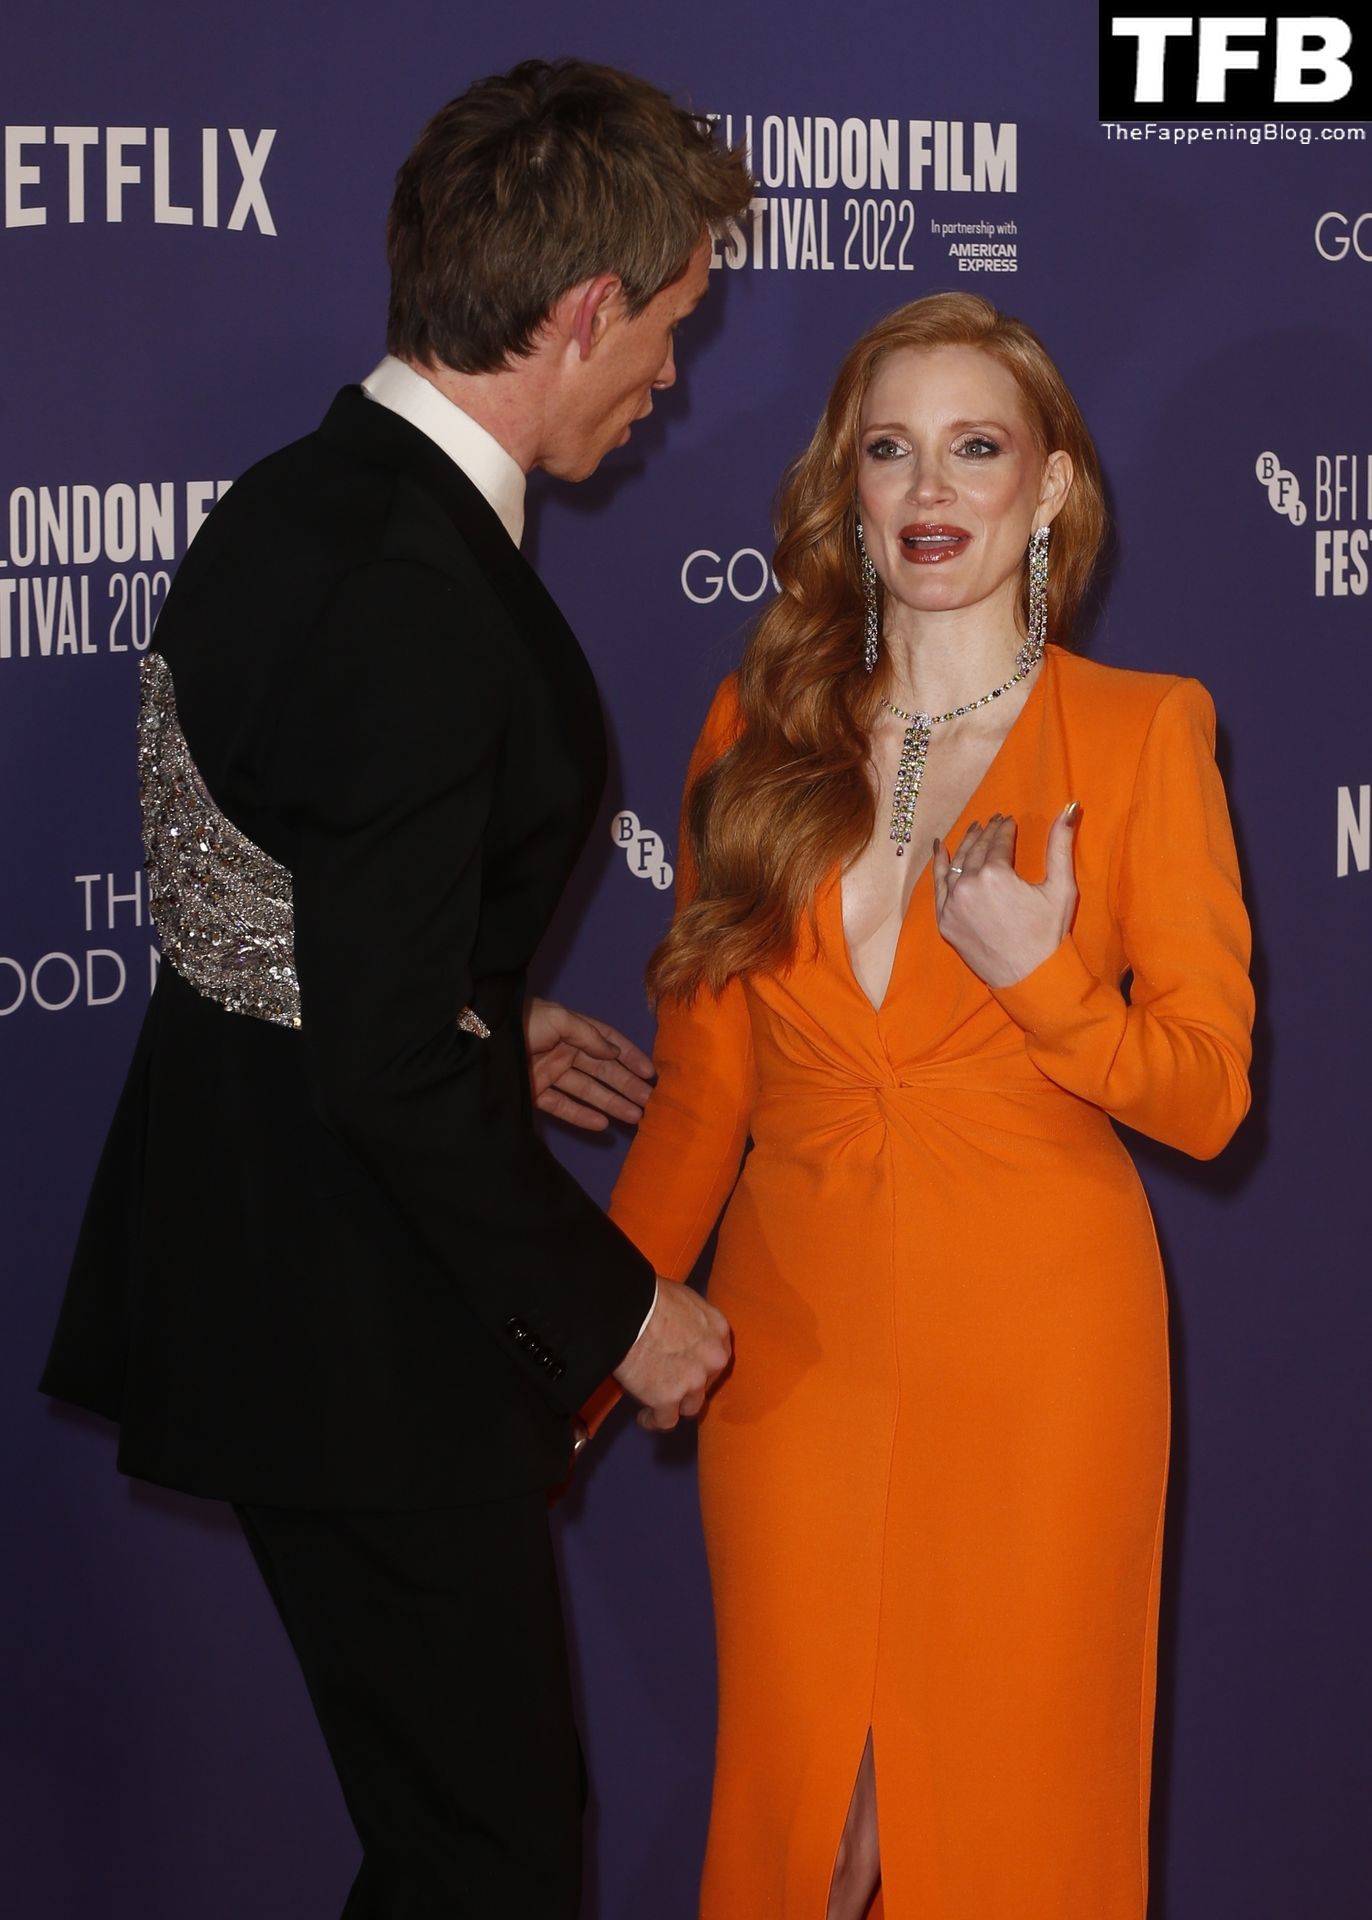 Jessica Chastain Poses for Photographers Upon Arrival for the Premiere of the Film “The Good Nurse” in London (150 Photos)